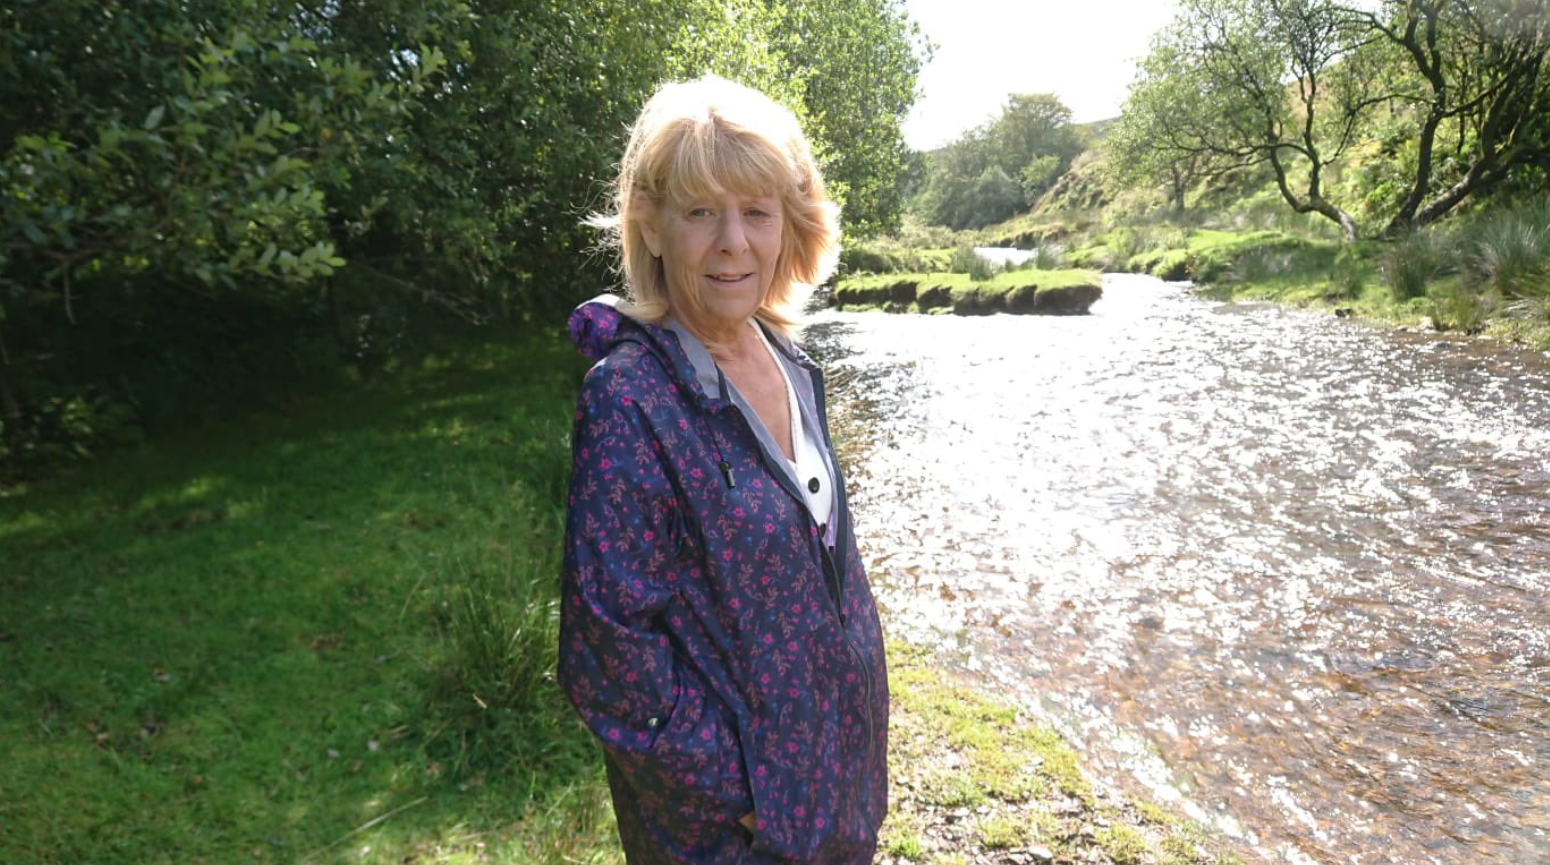 Woman in purple jacket stands by a rive